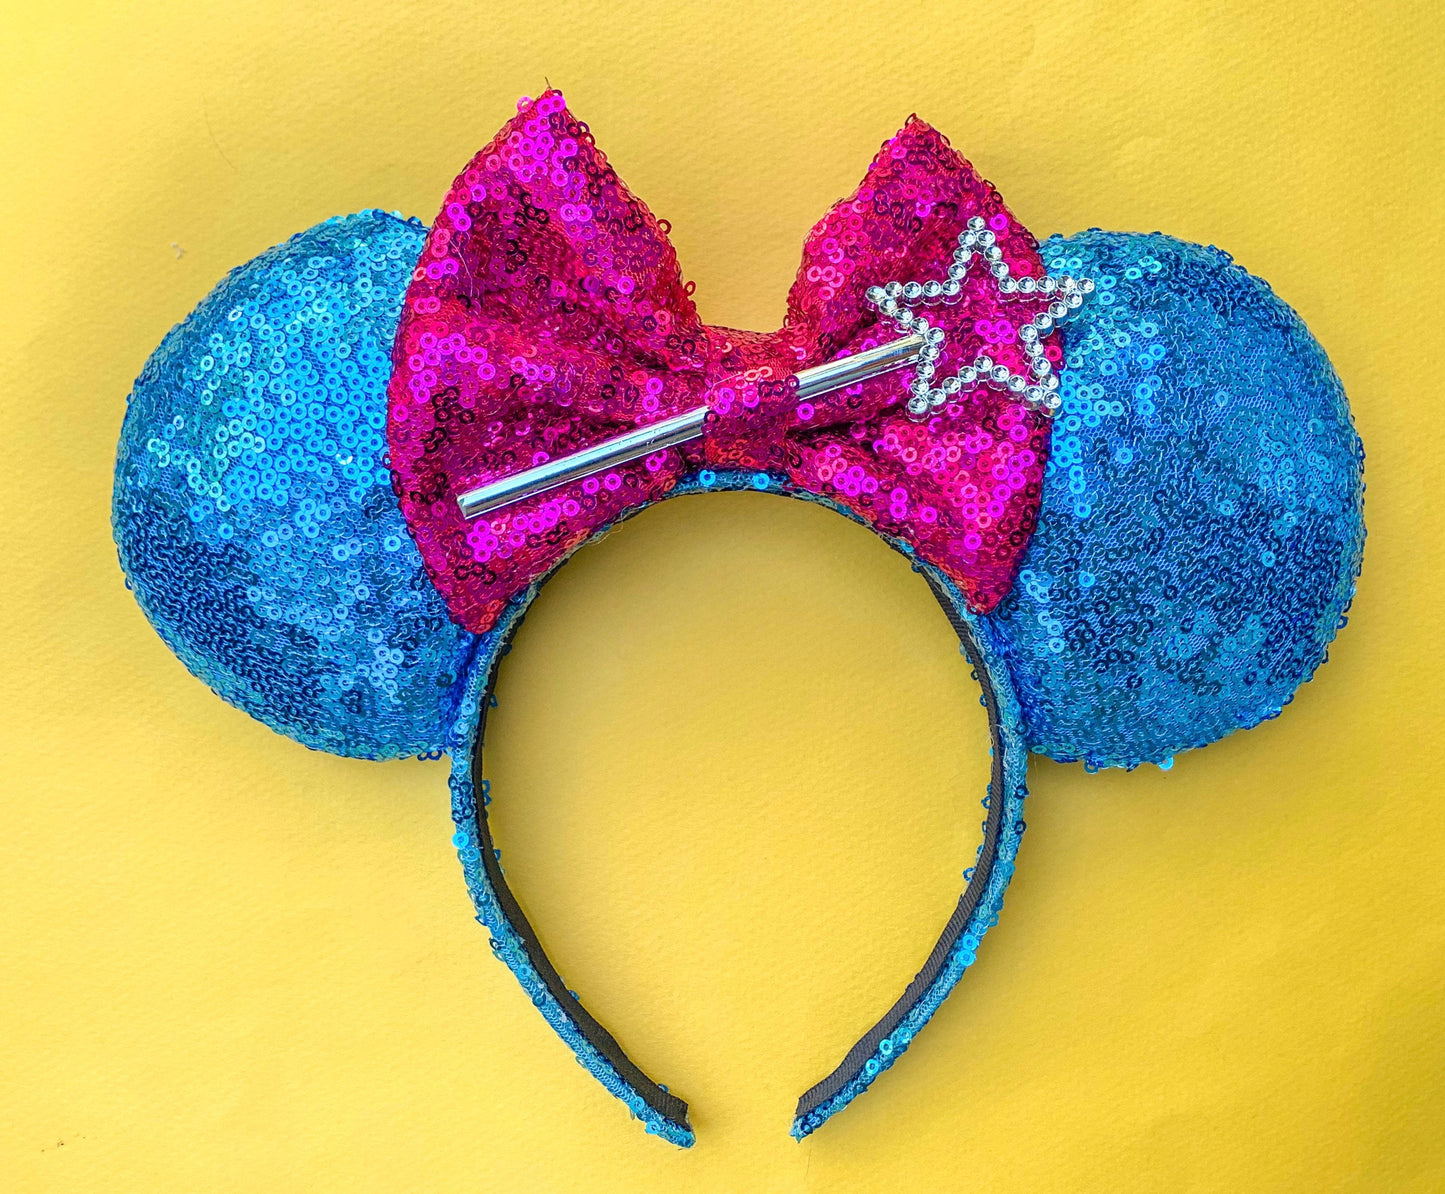 Fairy Godmother Inspired Mouse Ears!